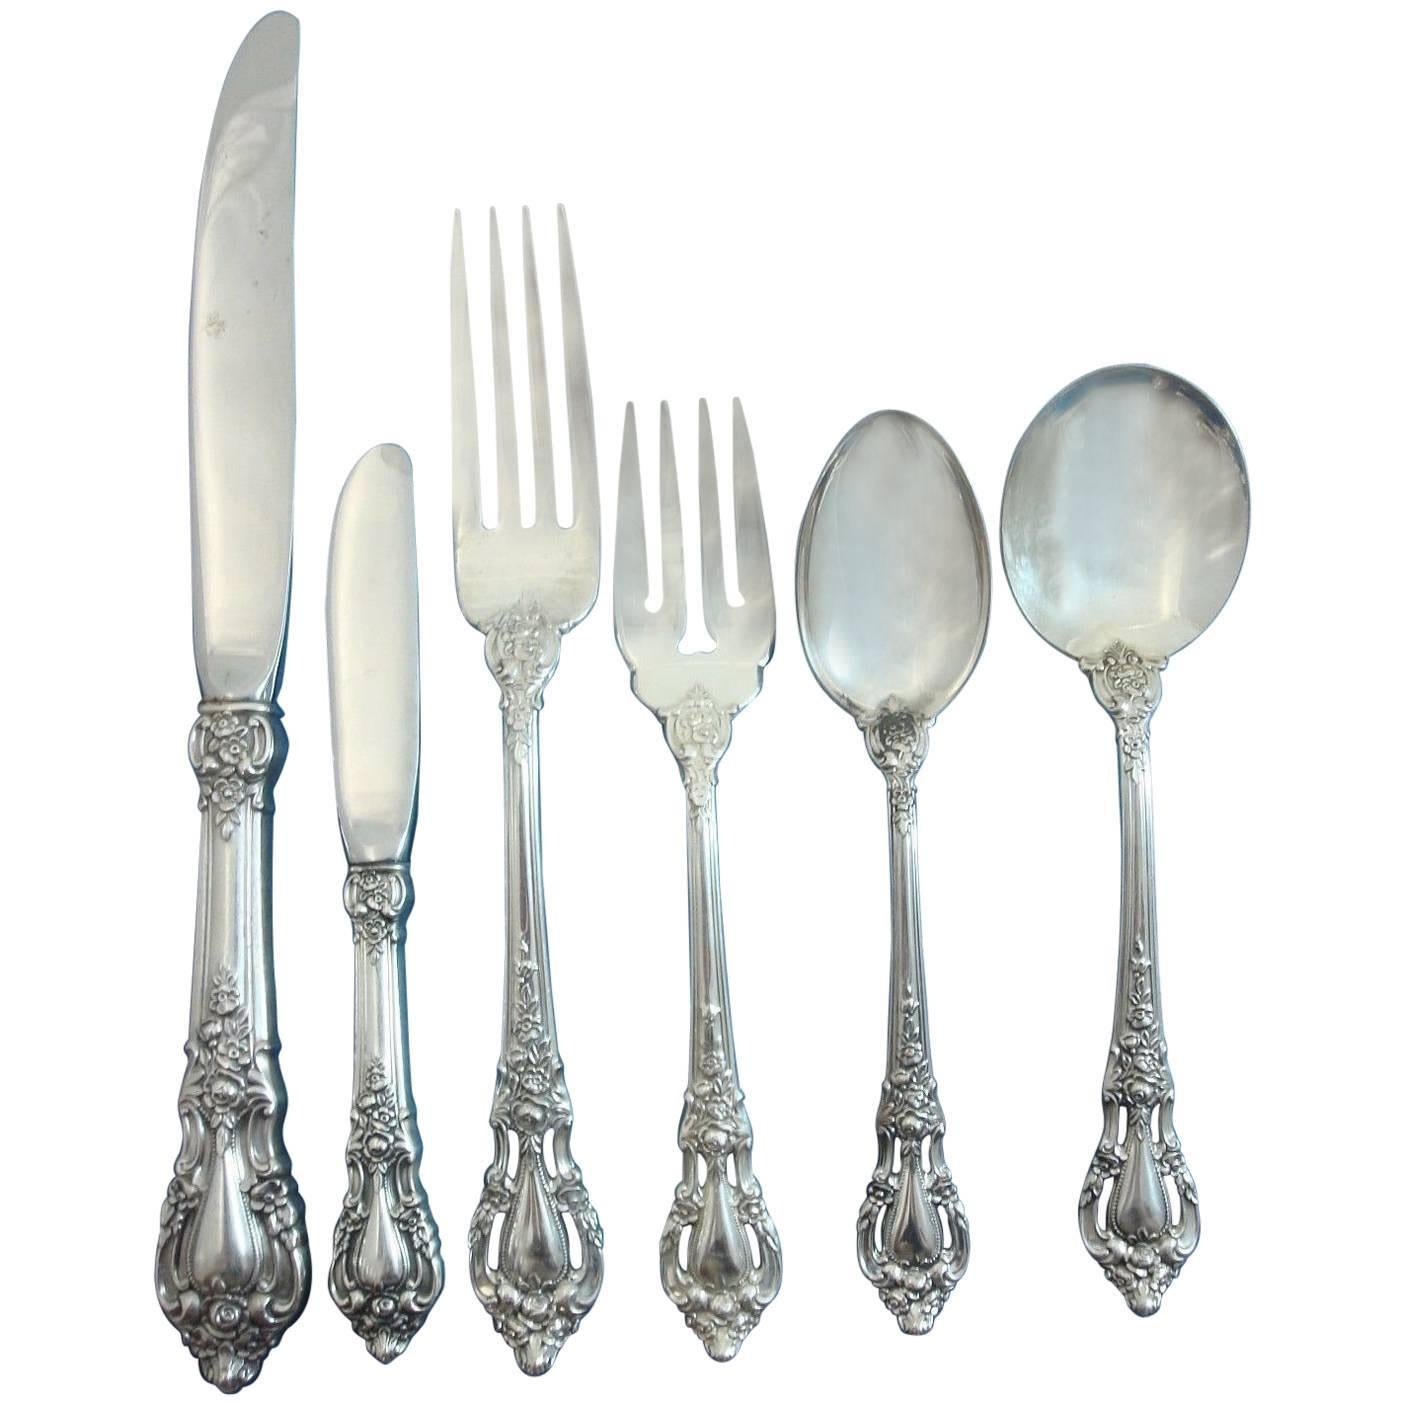 Eloquence by Lunt Sterling Silver Flatware Service Set 77 Pieces Dinner Size For Sale